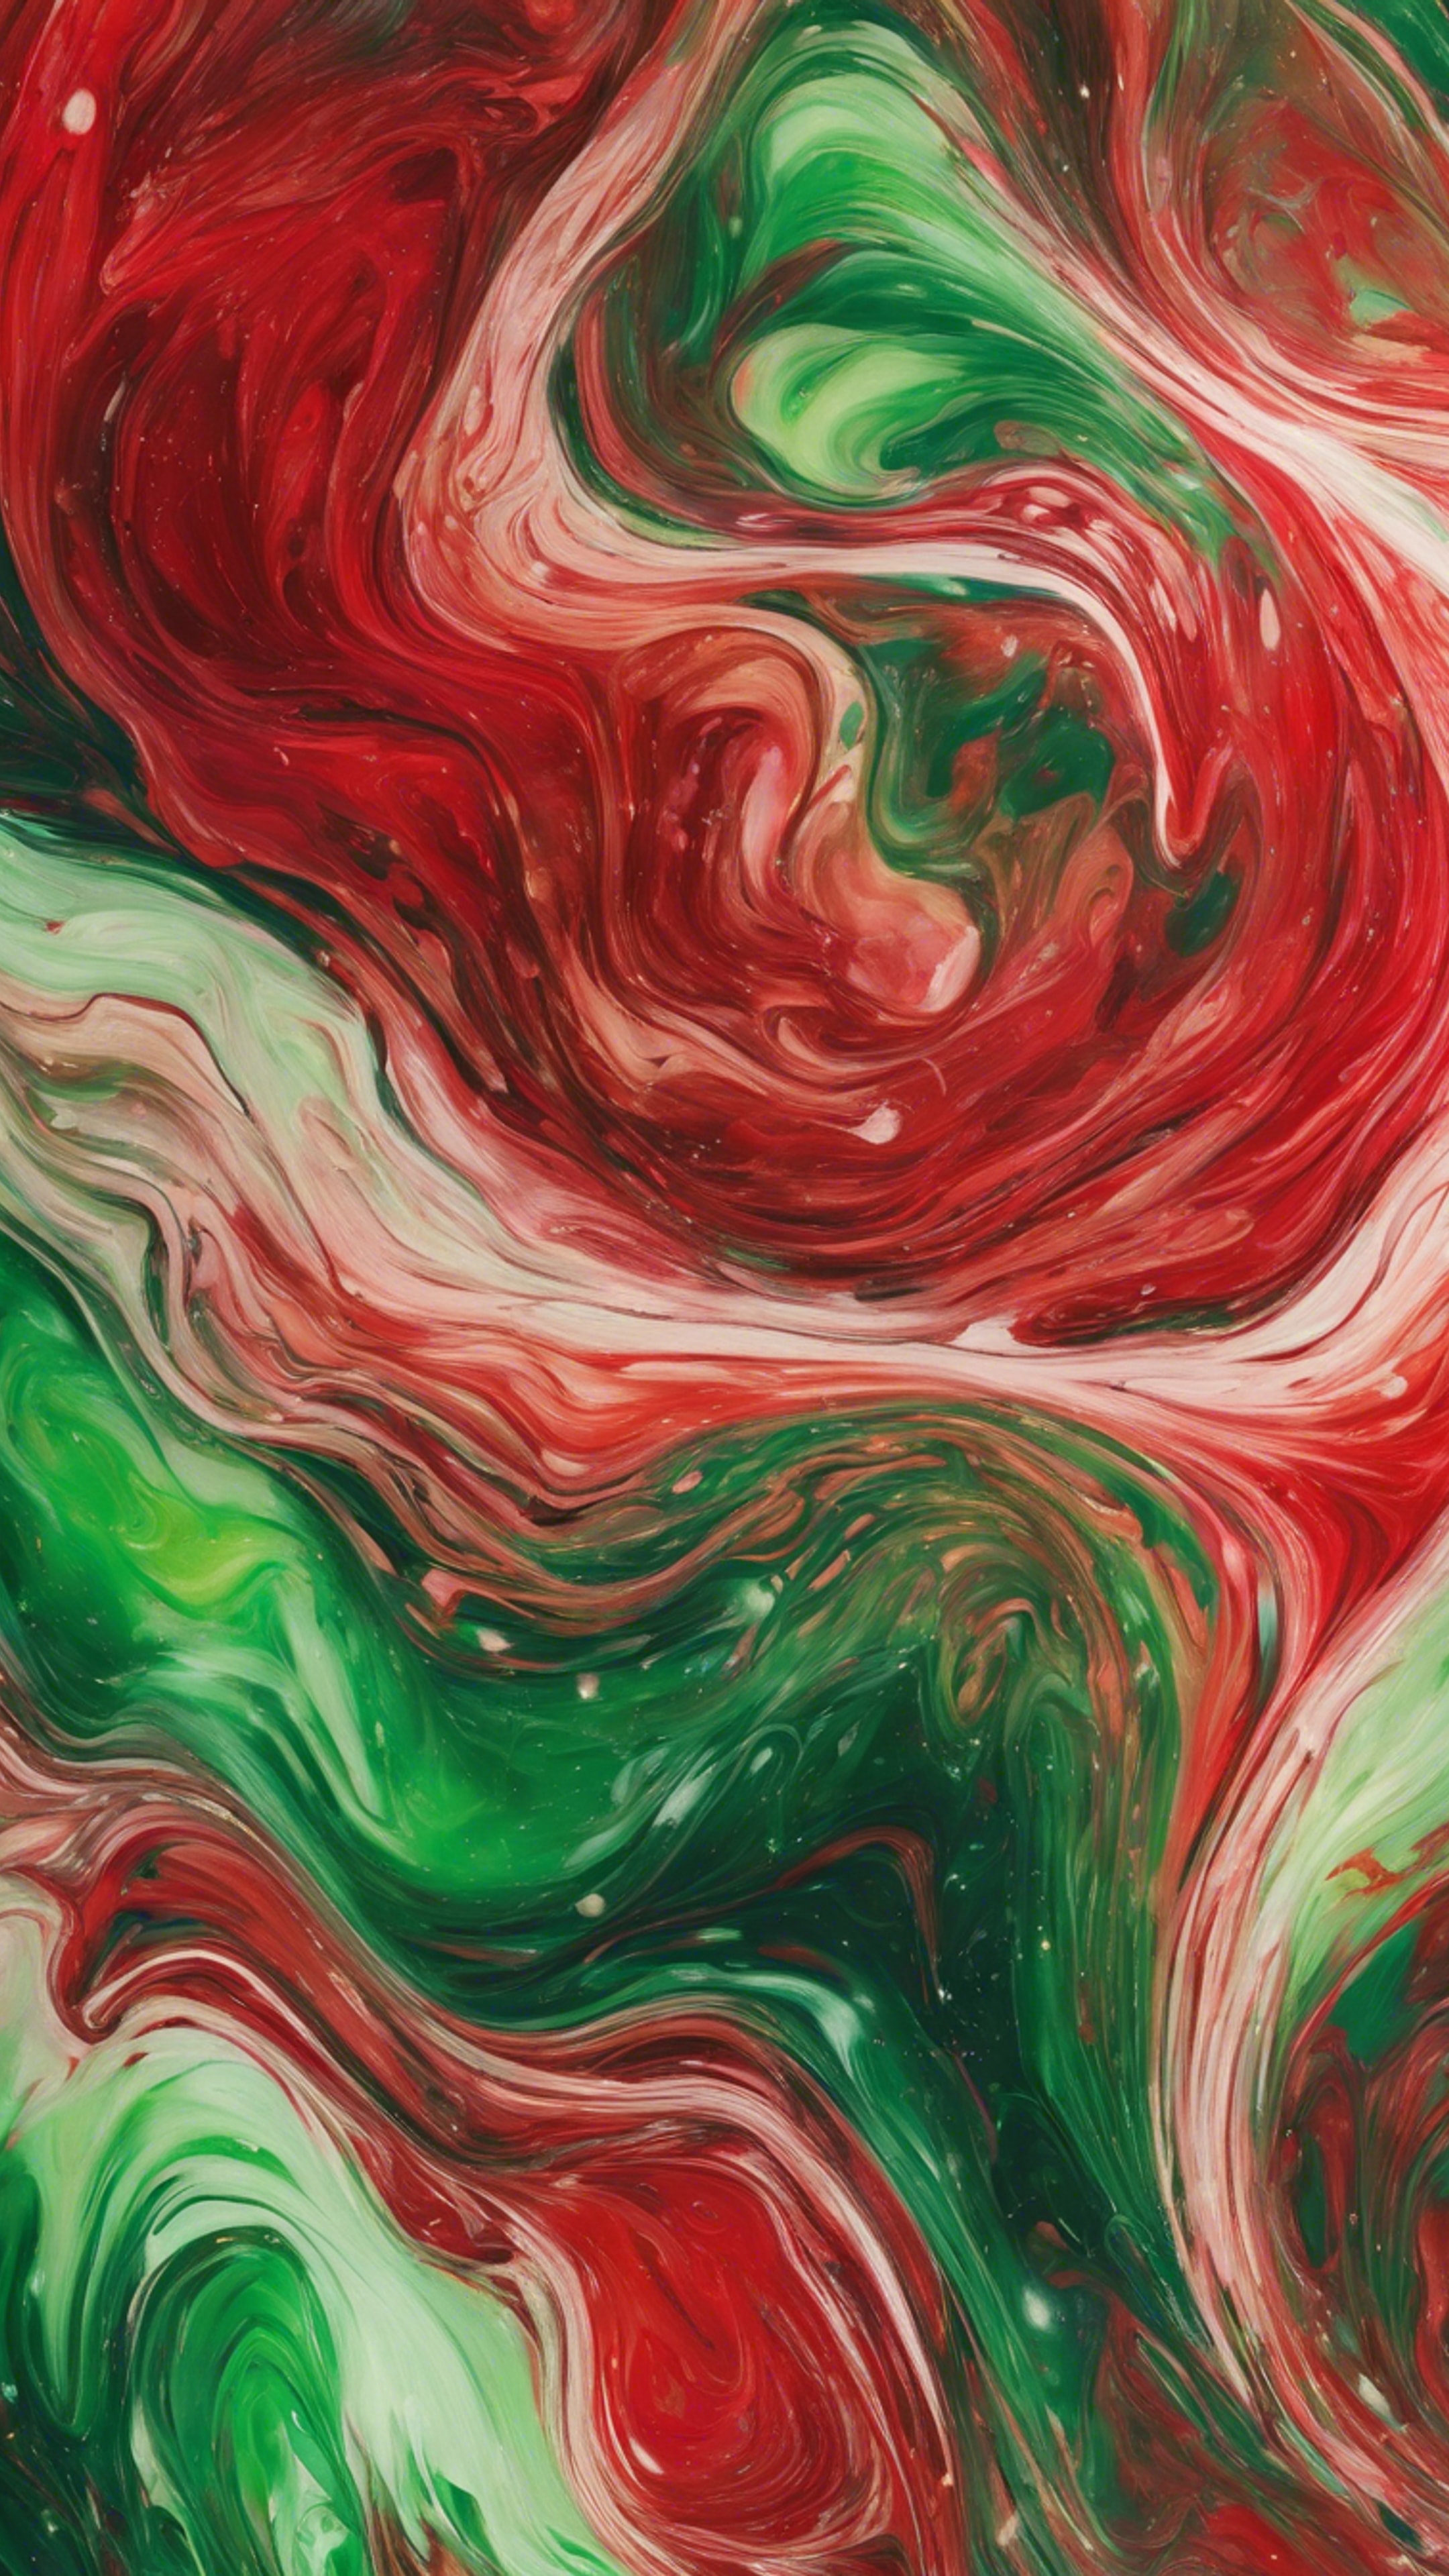 A vivid painting of swirling red and green abstract patterns Ფონი[5978fc4bccef4bcc8a58]